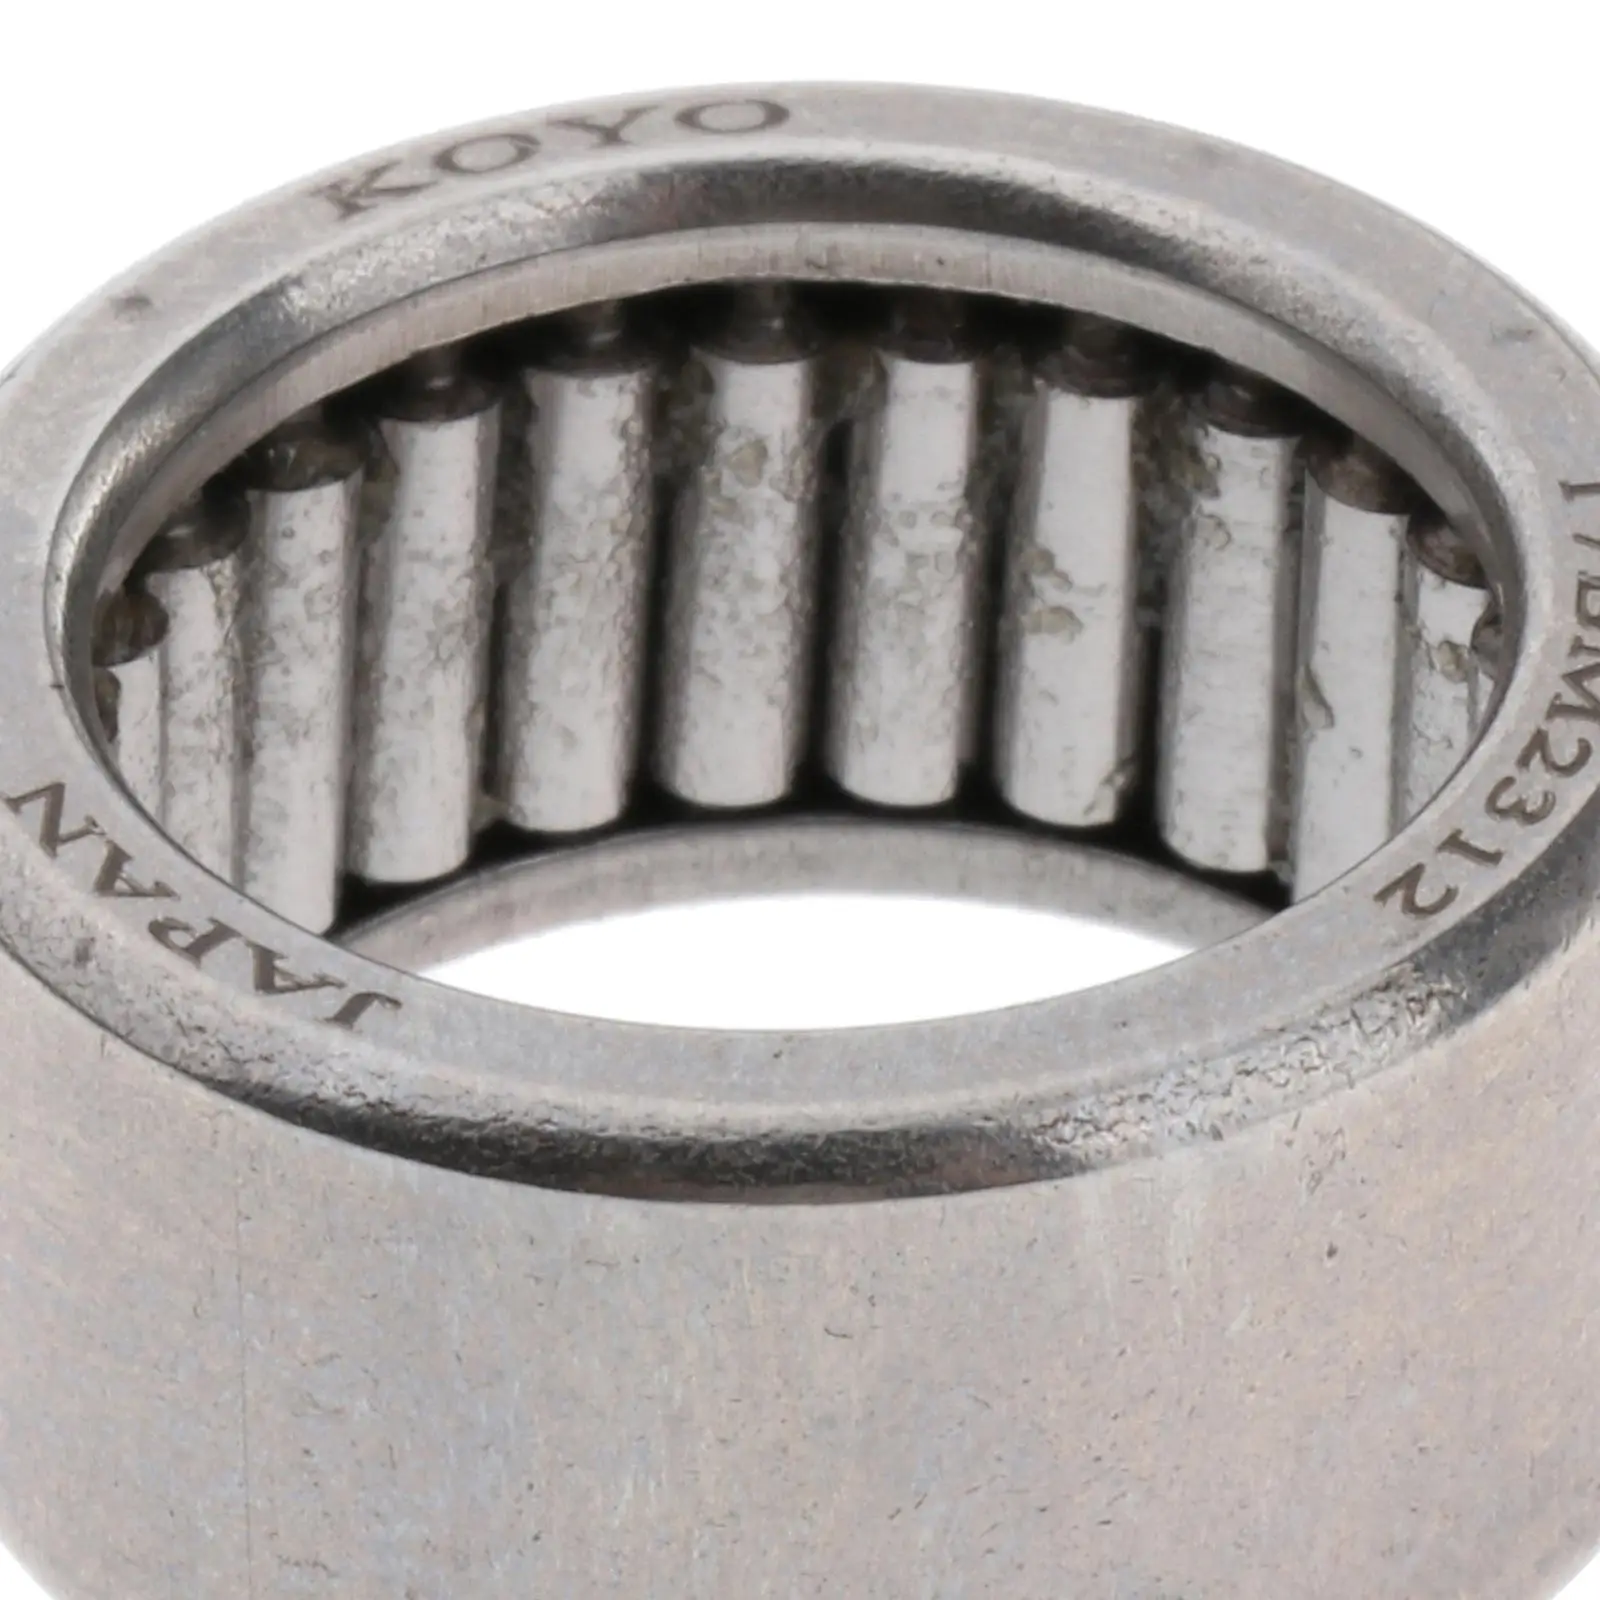 22mm Lower Casing  Bearing  NO.: 93315-317 Easy and Convenient to Install and Use